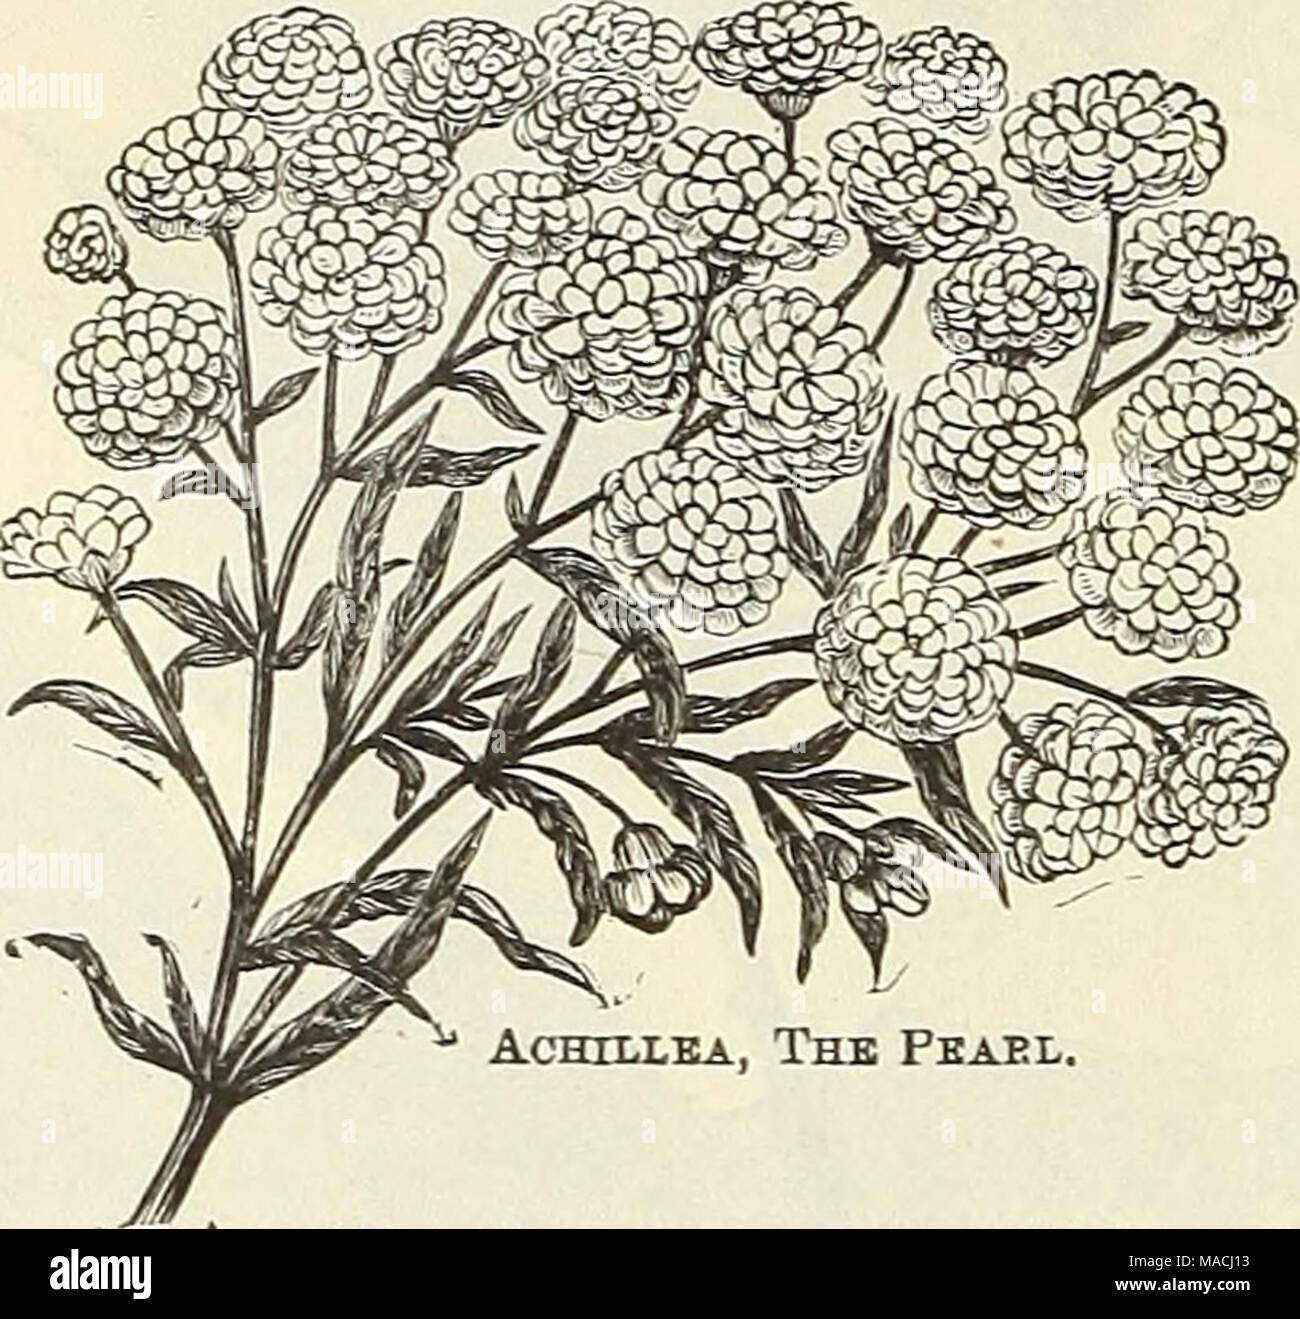 . Dreer's wholesale price list for 1901 : flower seeds, bulbs, aquatics, plants vegetable seeds, tools, implements, fertilizers, etc., etc . ACHILLKA, ThB FEAEL. Achillea. (Milfoil.) Perdoz. Per loo. Filipendulina. Strong di-s-isions $ 75 $6 oo Millefolium Roseum. Strong divisions . 60 4 00 The Pearl. 3-inch pots 60 4 00 Tomentosum. Strong divisions I 00 8 00 Actsea. (Baneberry.) Japonica. A Japanese introduction producing dense spikes of pure white flowers not unlike our native Baneberr}', but while our native species flowers during June, the Japanese form does not come into bloom imtil Septe Stock Photo